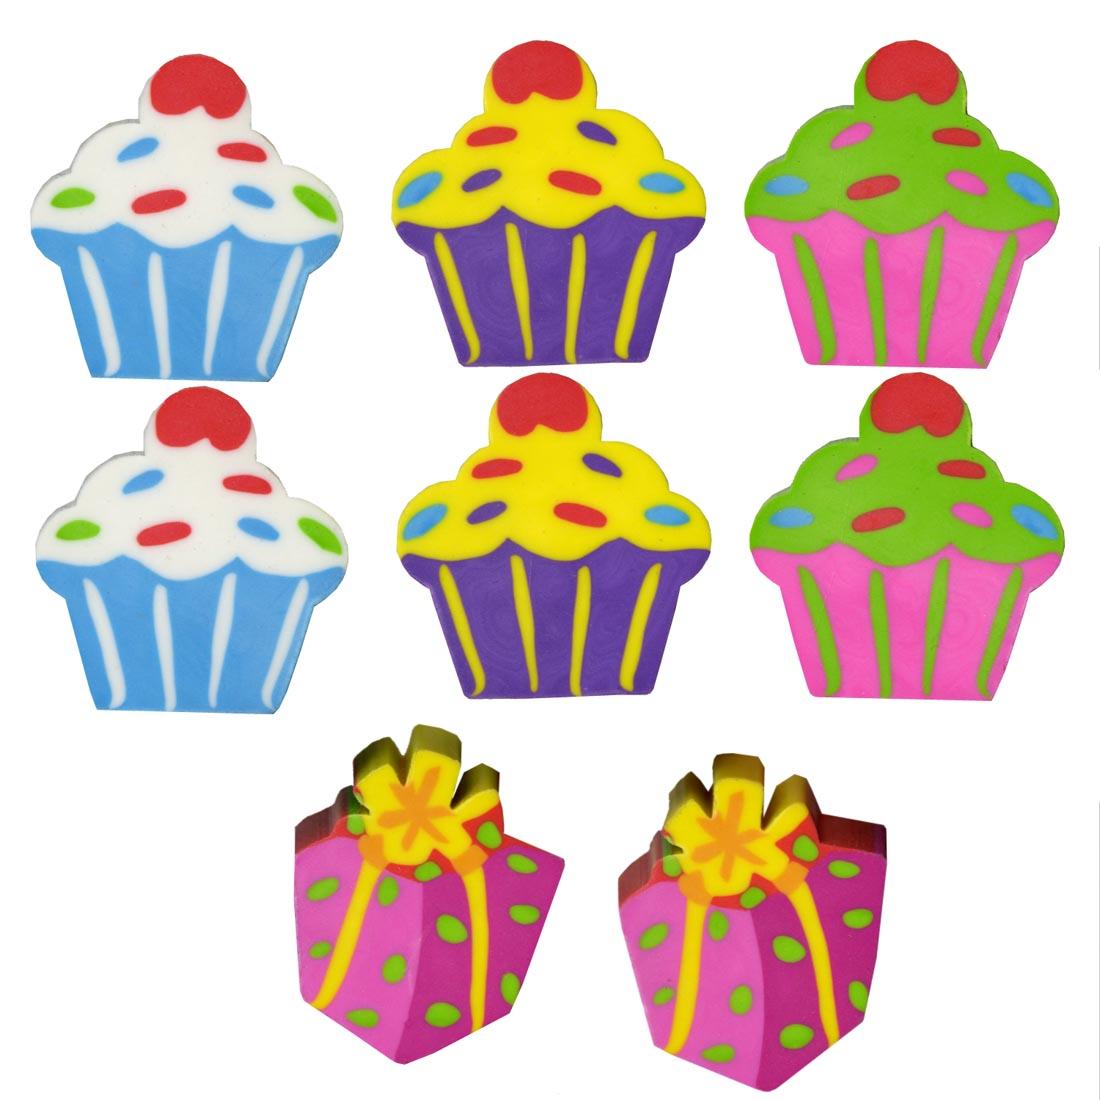 Party Pencil Topper Erasers include cupcakes and gift shapes